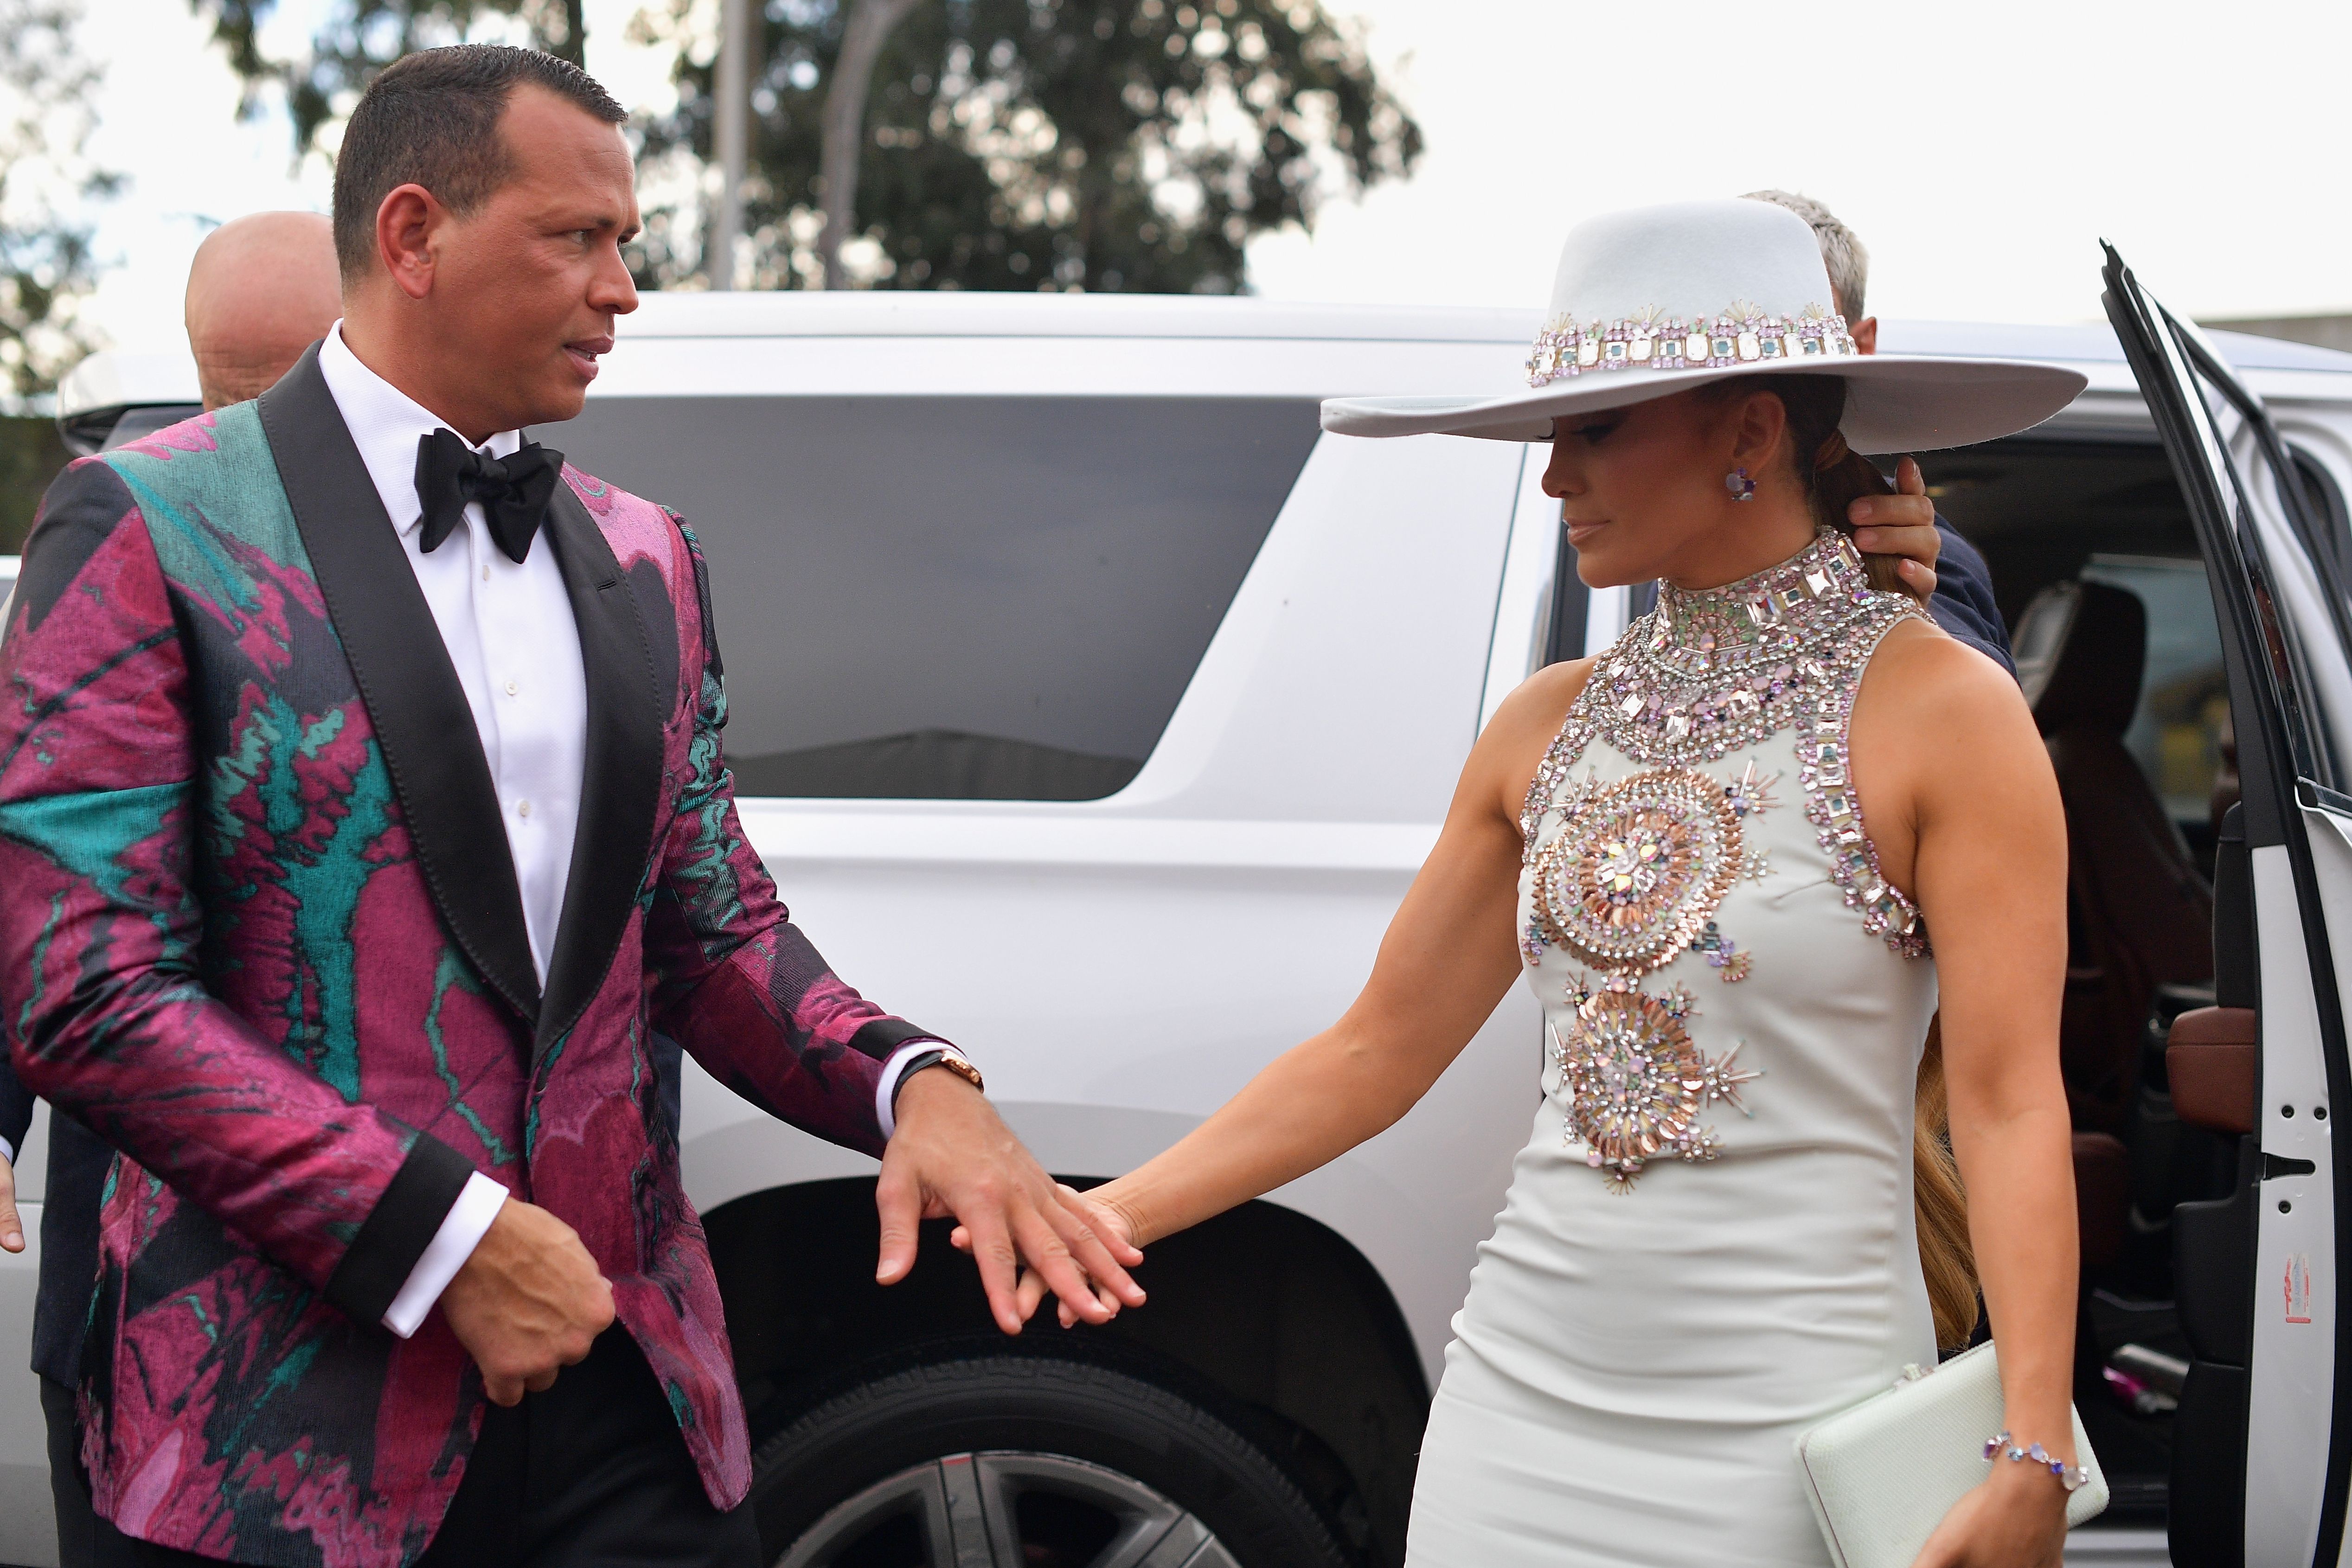 Alex Rodriguez and Jennifer Lopez at the 61st Annual GRAMMY Awards at Staples Center in Los Angeles, California | Photo: Matt Winkelmeyer/Getty Images for The Recording Academy